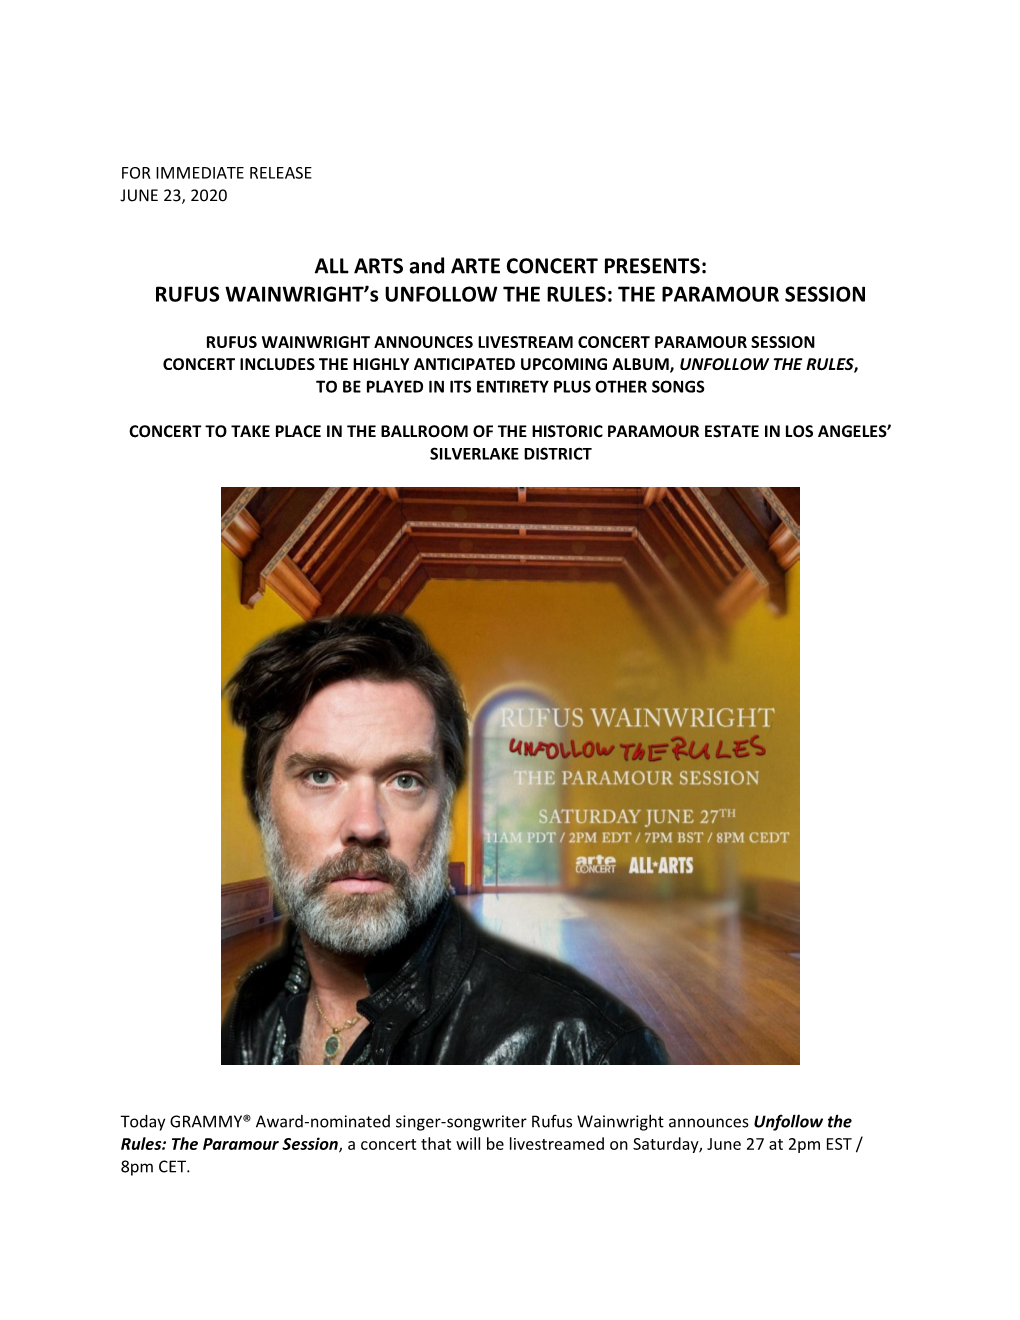 ALL ARTS and ARTE CONCERT PRESENTS: RUFUS WAINWRIGHT's UNFOLLOW the RULES: the PARAMOUR SESSION